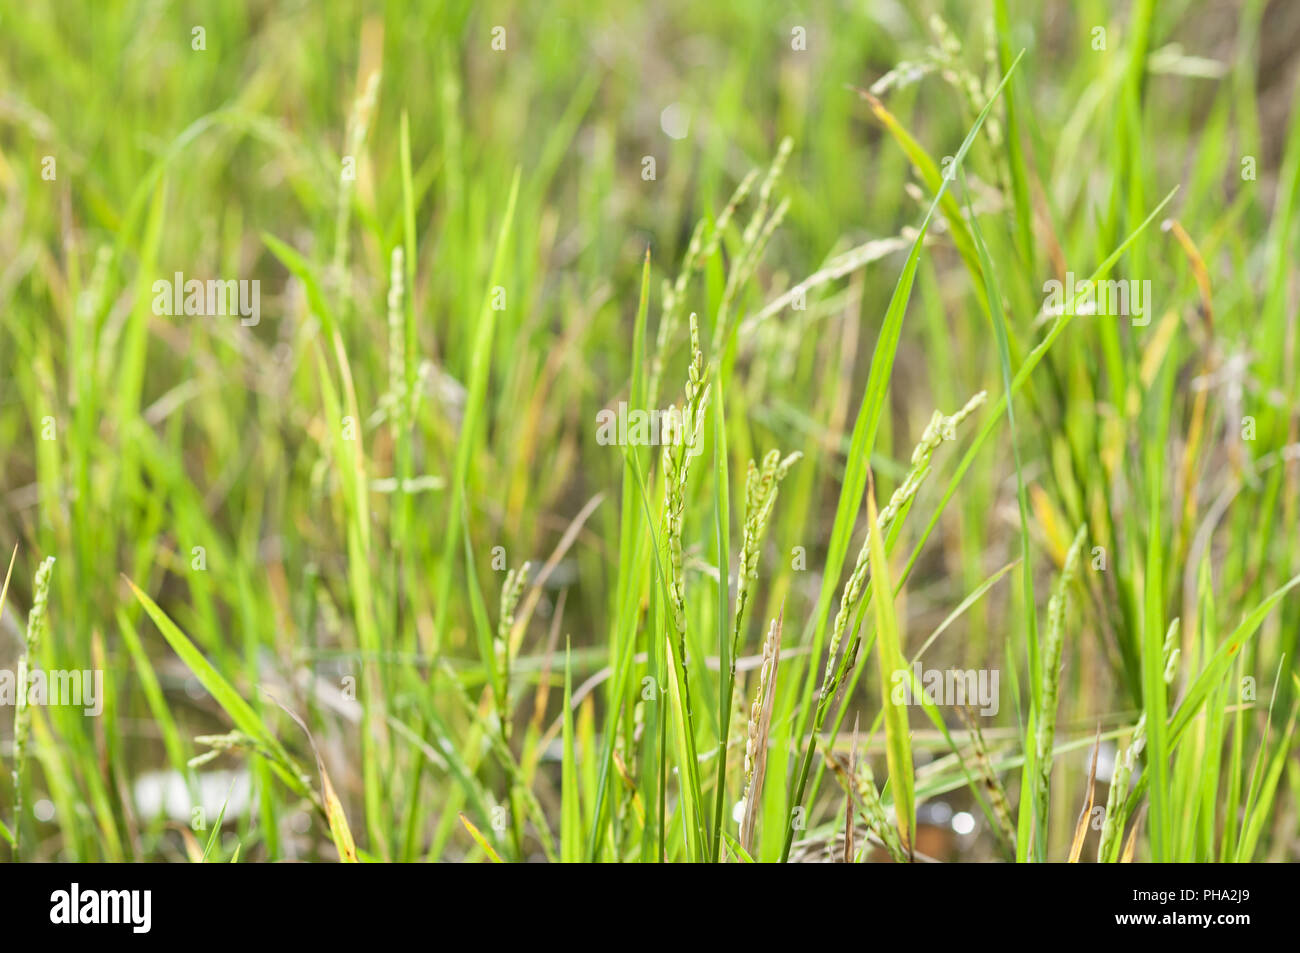 Green rice field on the island of Luzon, Philippines. Stock Photo